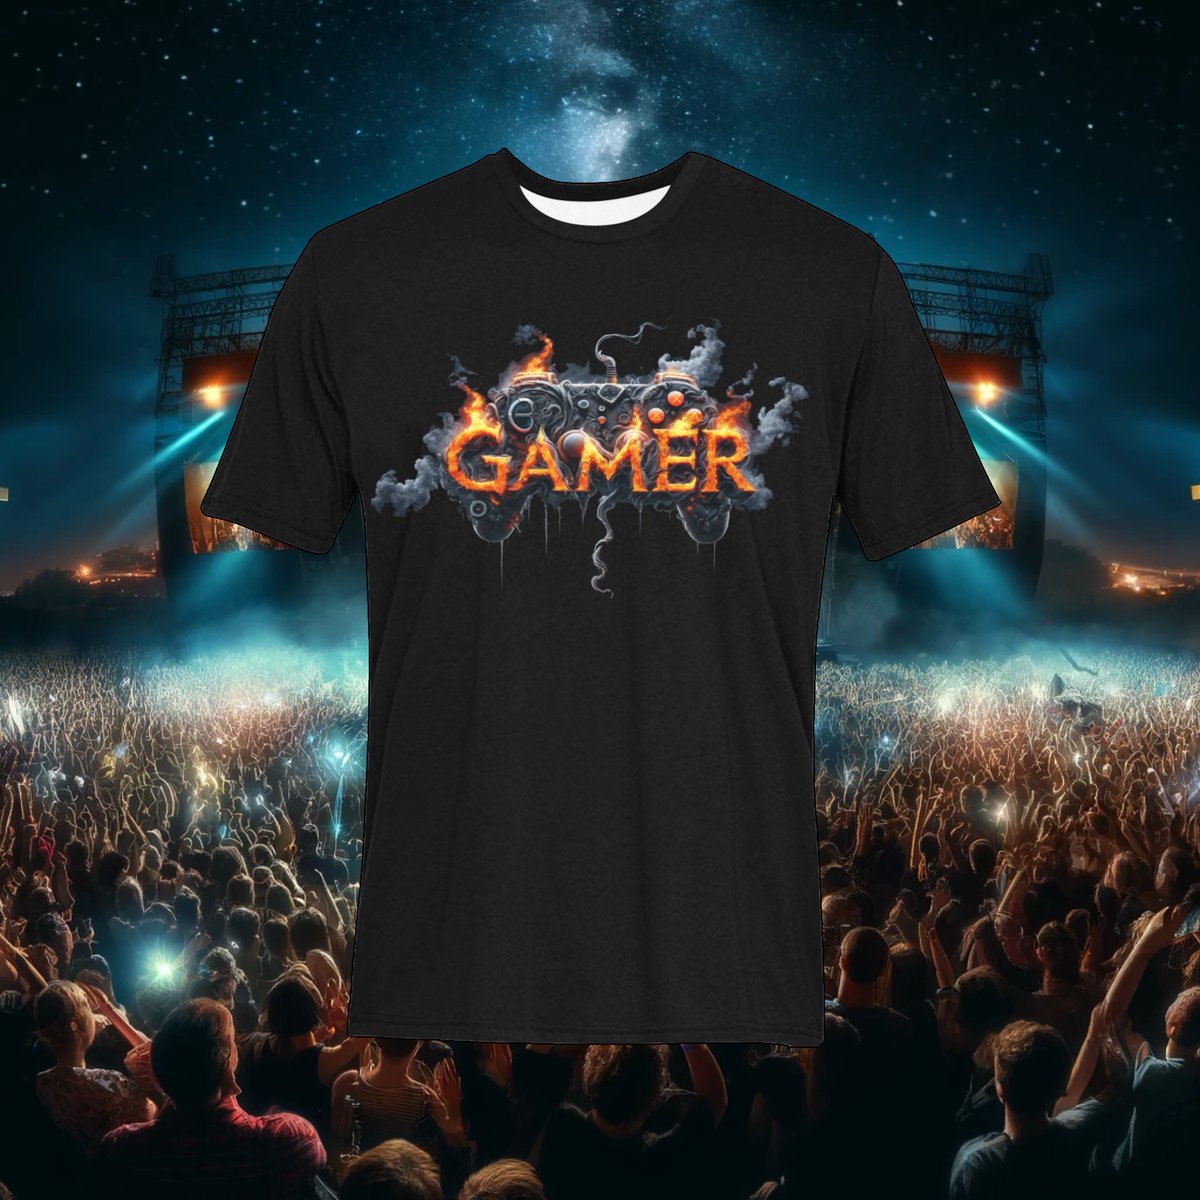 Gear up, gamers! Our Ultimate Gamer T-shirt is here to add some serious style to your gaming sessions. With explosive graphics that capture the thrill of the game, it's more than just apparel—it's an armor. 🎮💥 #GamerWear #GameOn
shhcreations.com/products/ultim…